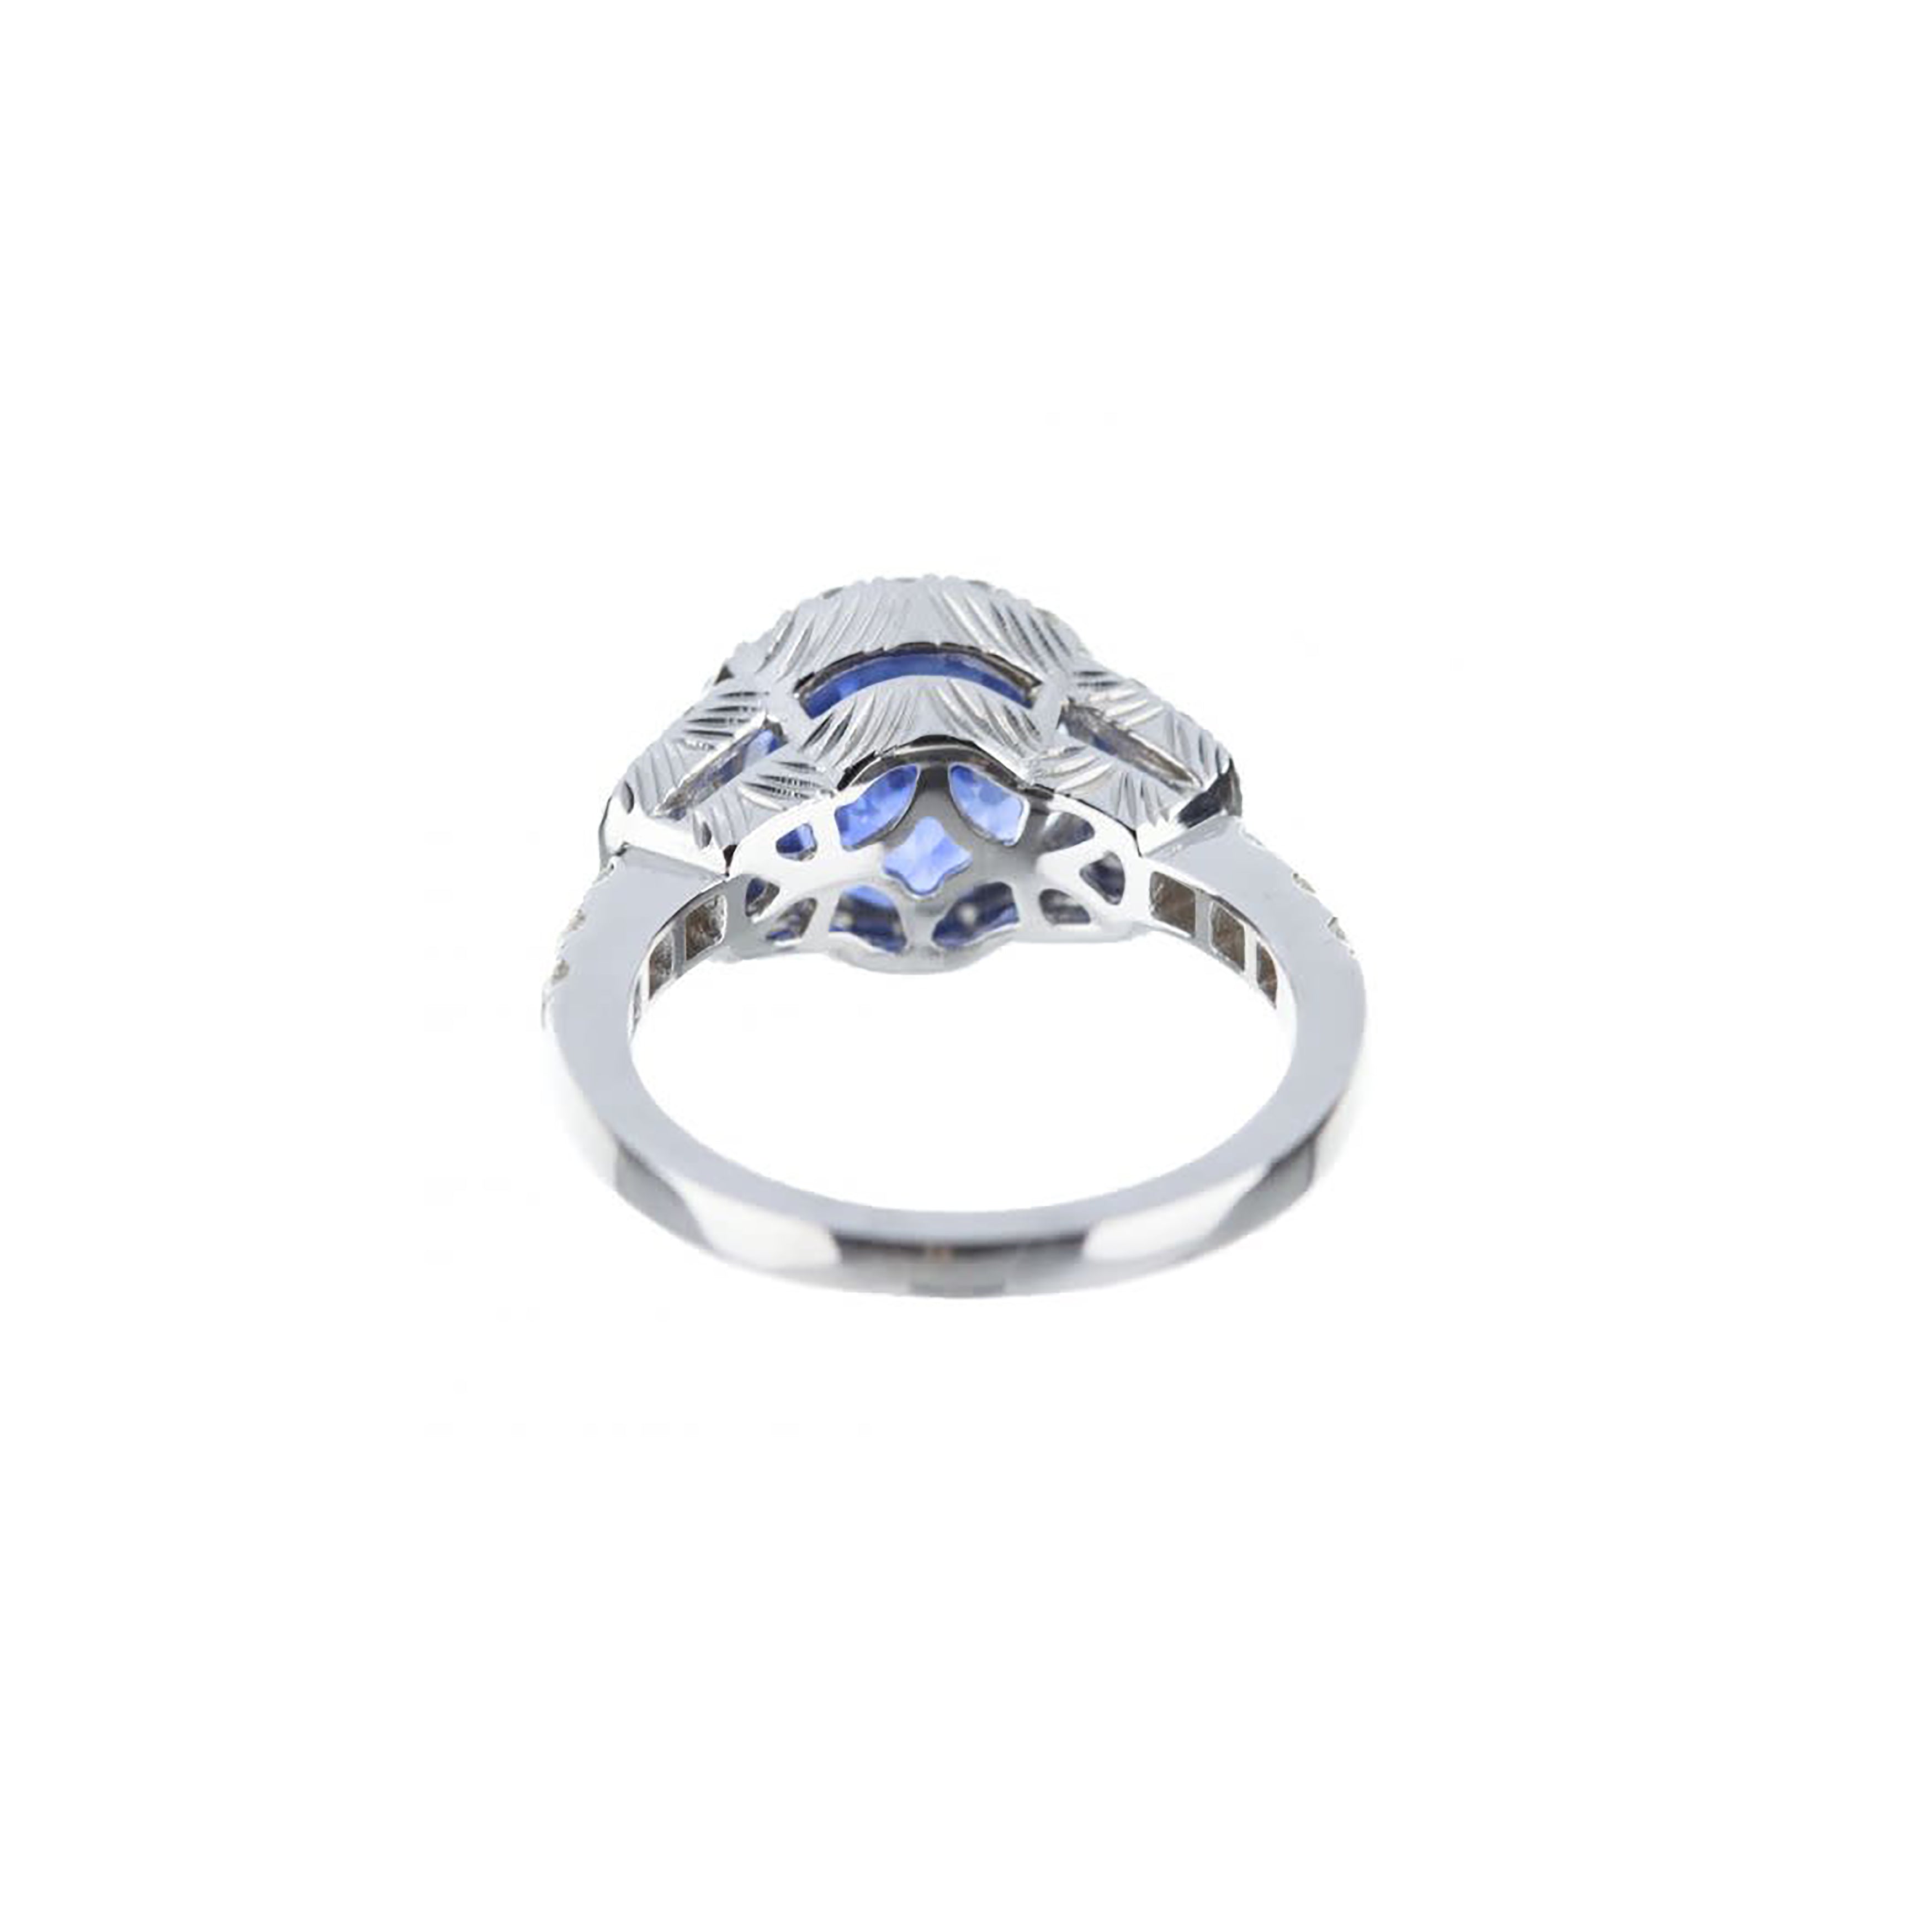 18K White Gold Round Blue Sapphire Engagement Ring With Trapezoid-Cut Diamond Accents And Diamond Halo